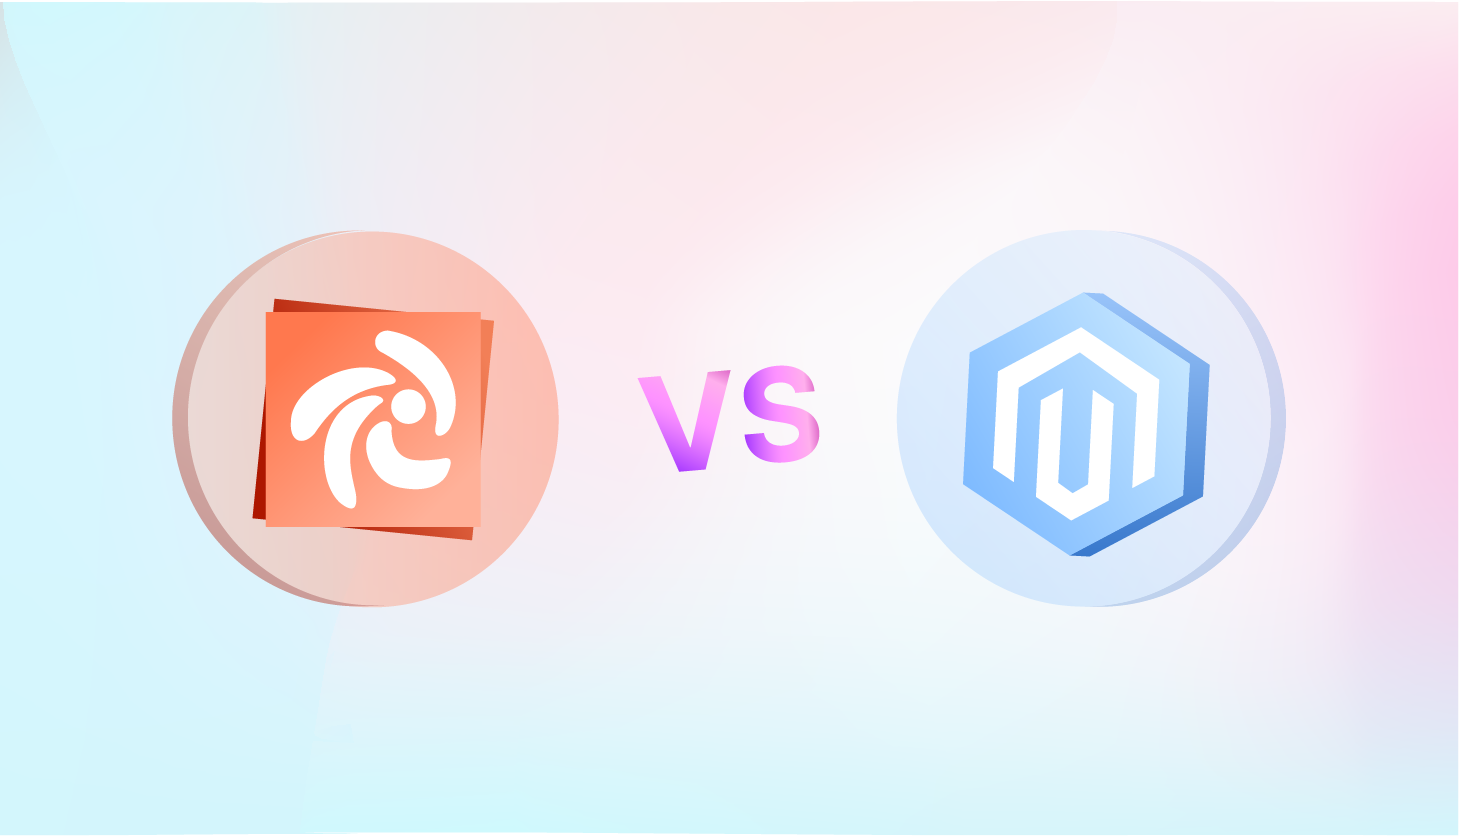 Zencart vs Magento: Similarities and Differences